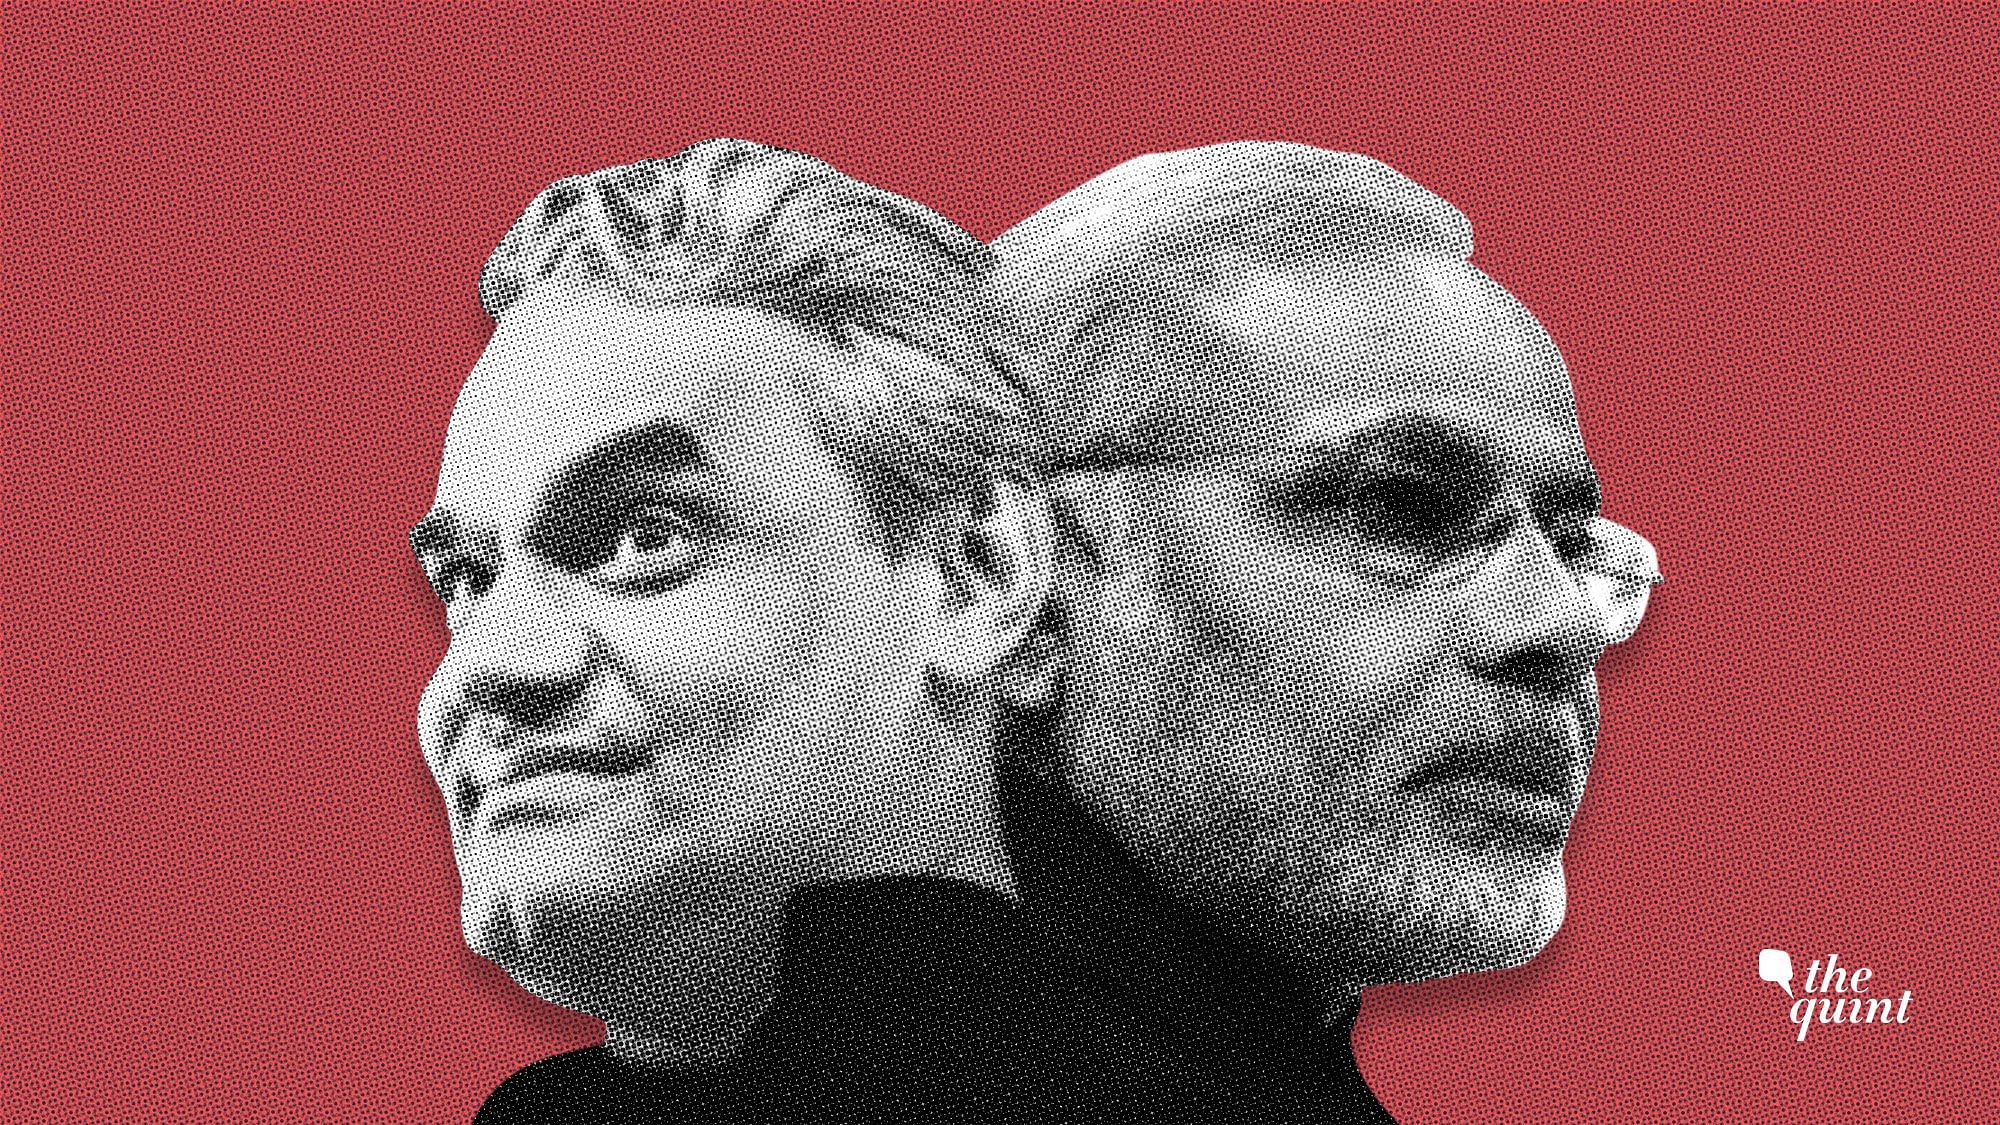 Modi says Vajpayee is his guru. If that were the case, like him he must chose technology over timidity.